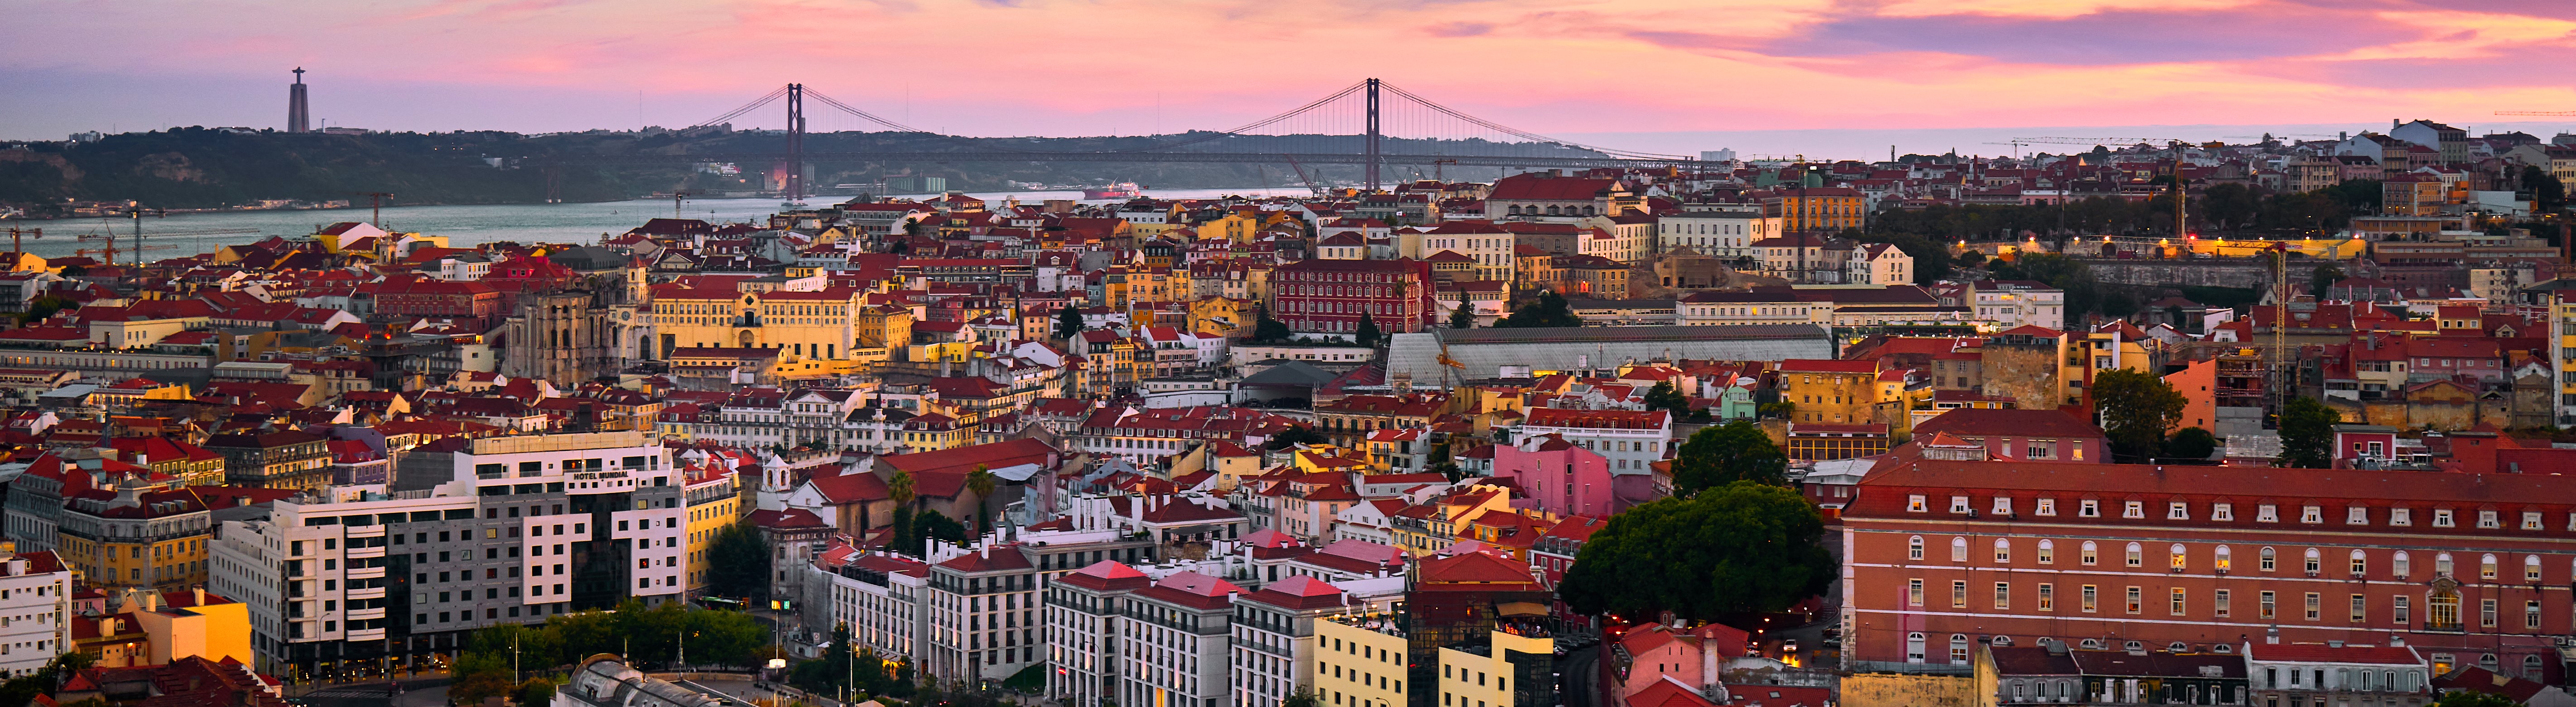 Management Training Courses in Lisbon, Portugal